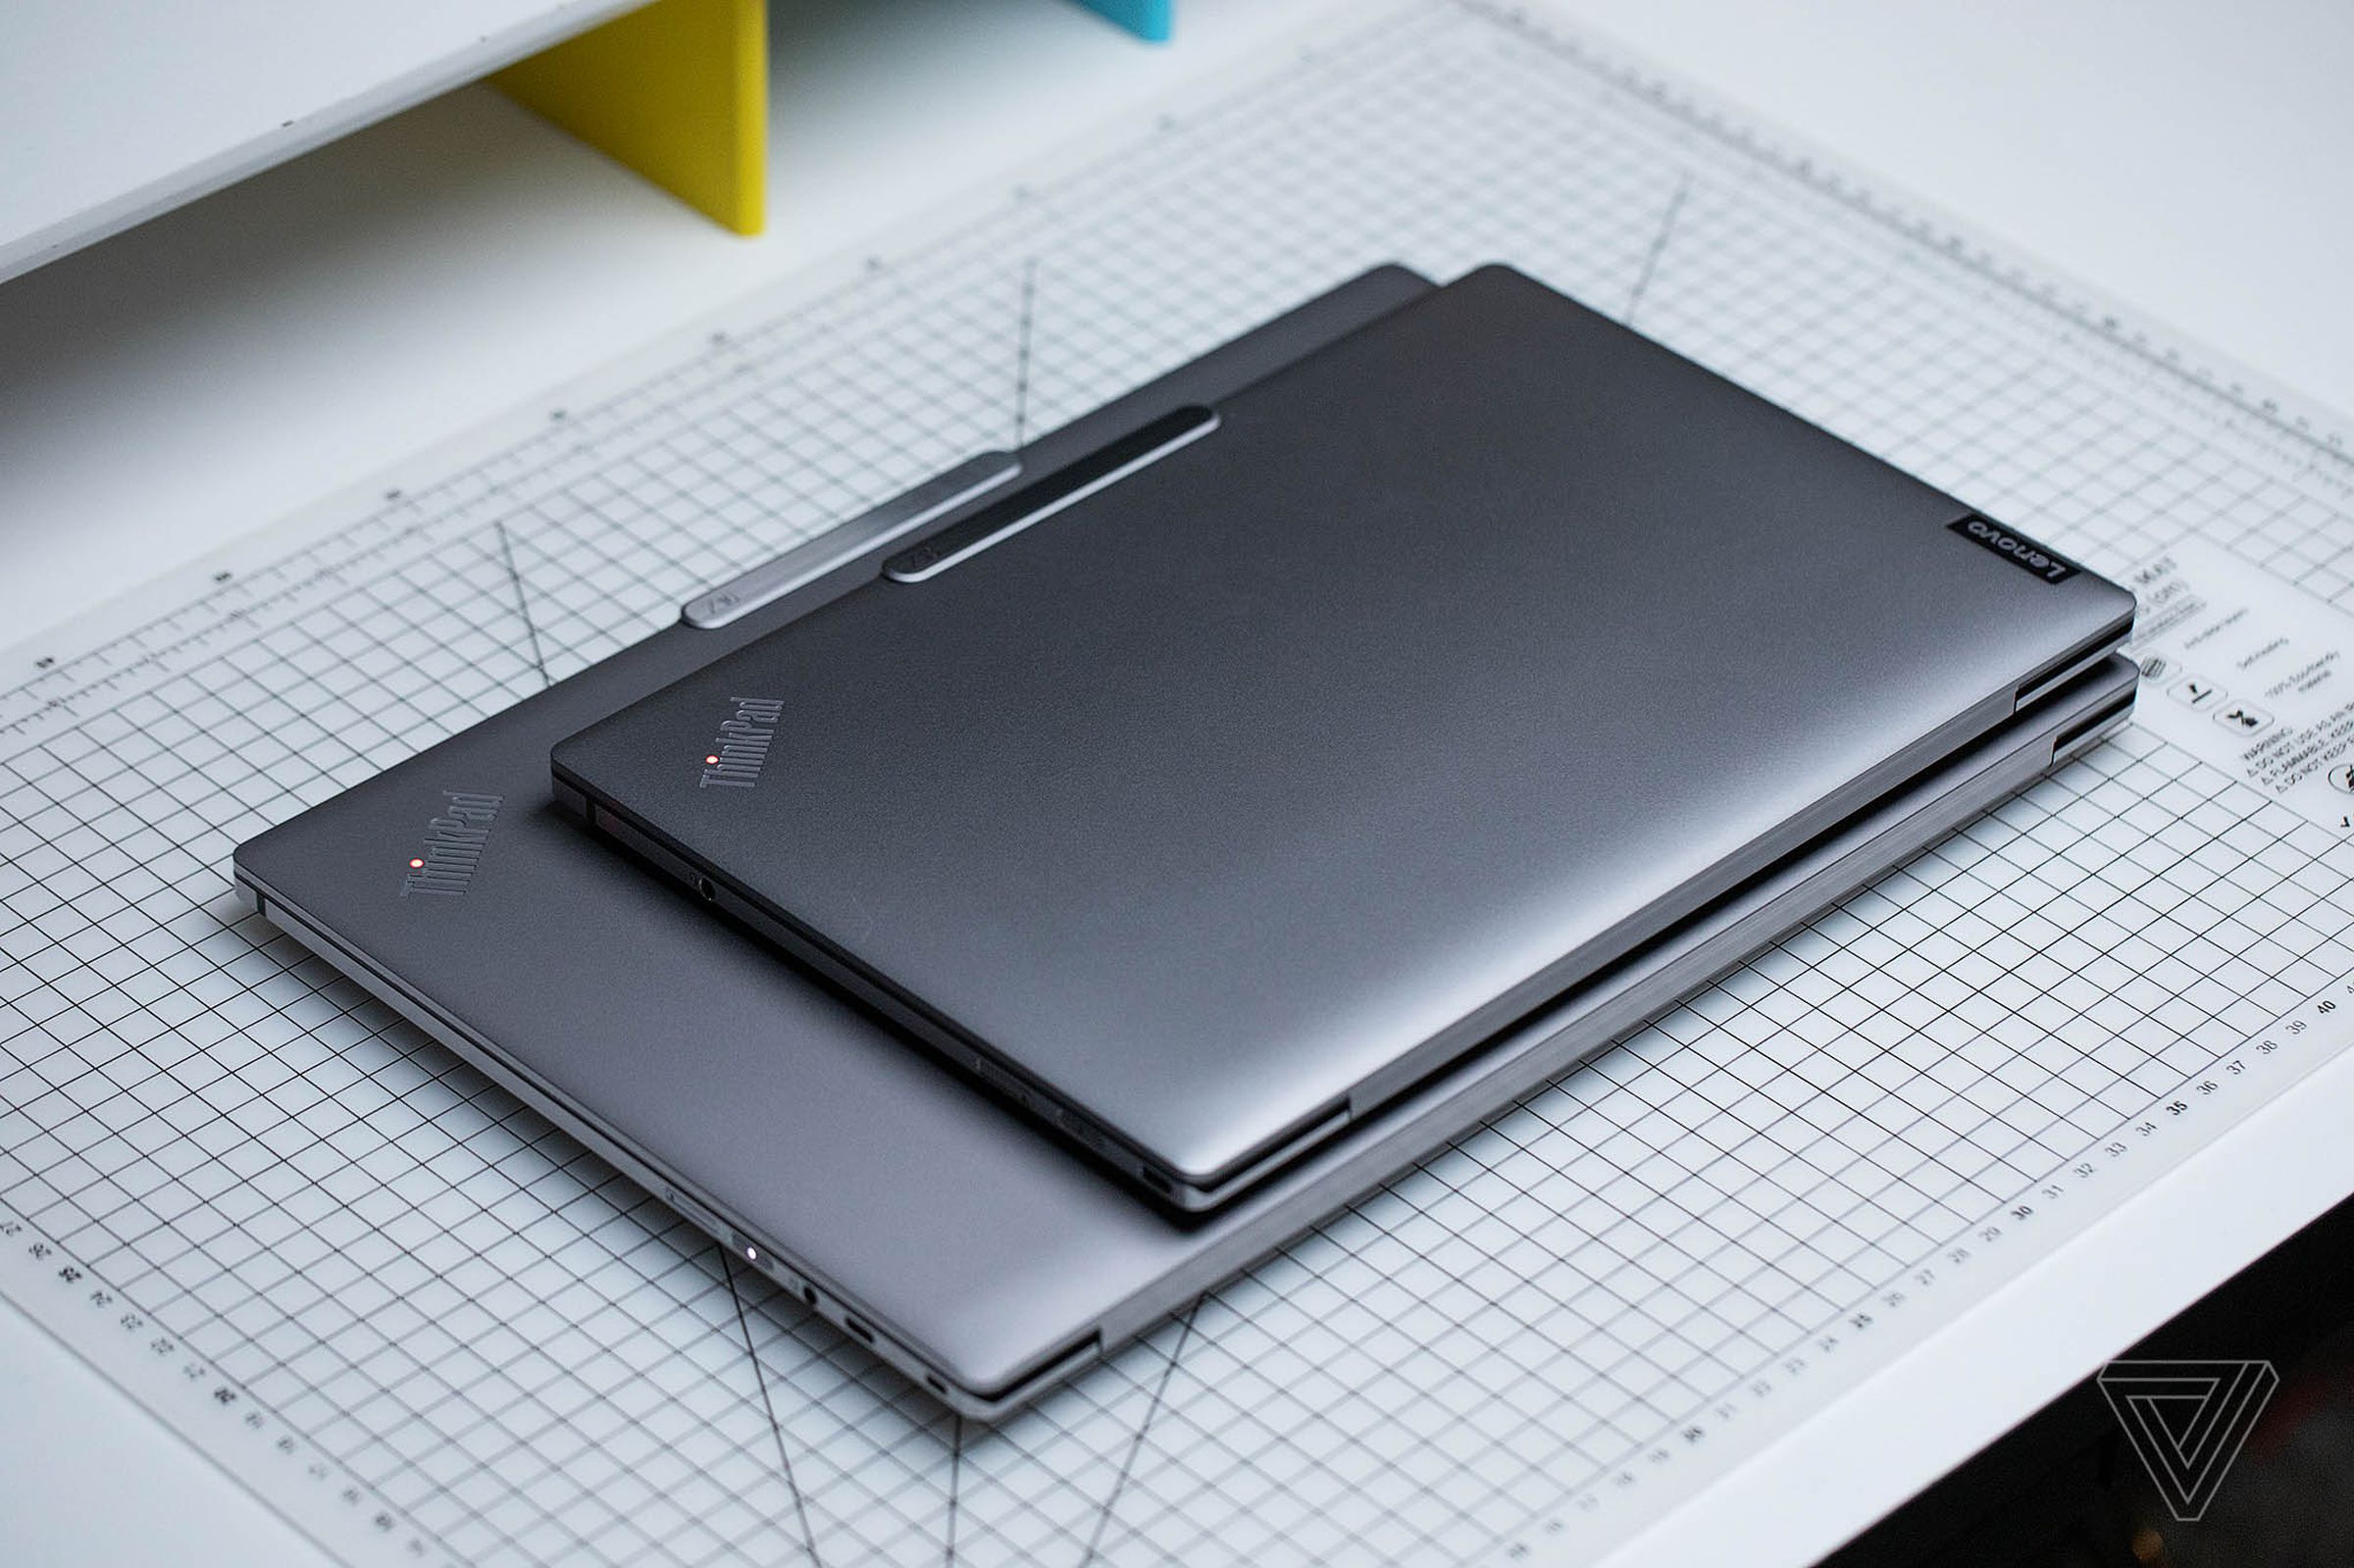 The Lenovo ThinkPad Z13 on top of the Lenovo ThinkPad Z16, both closed atop a gridded table.